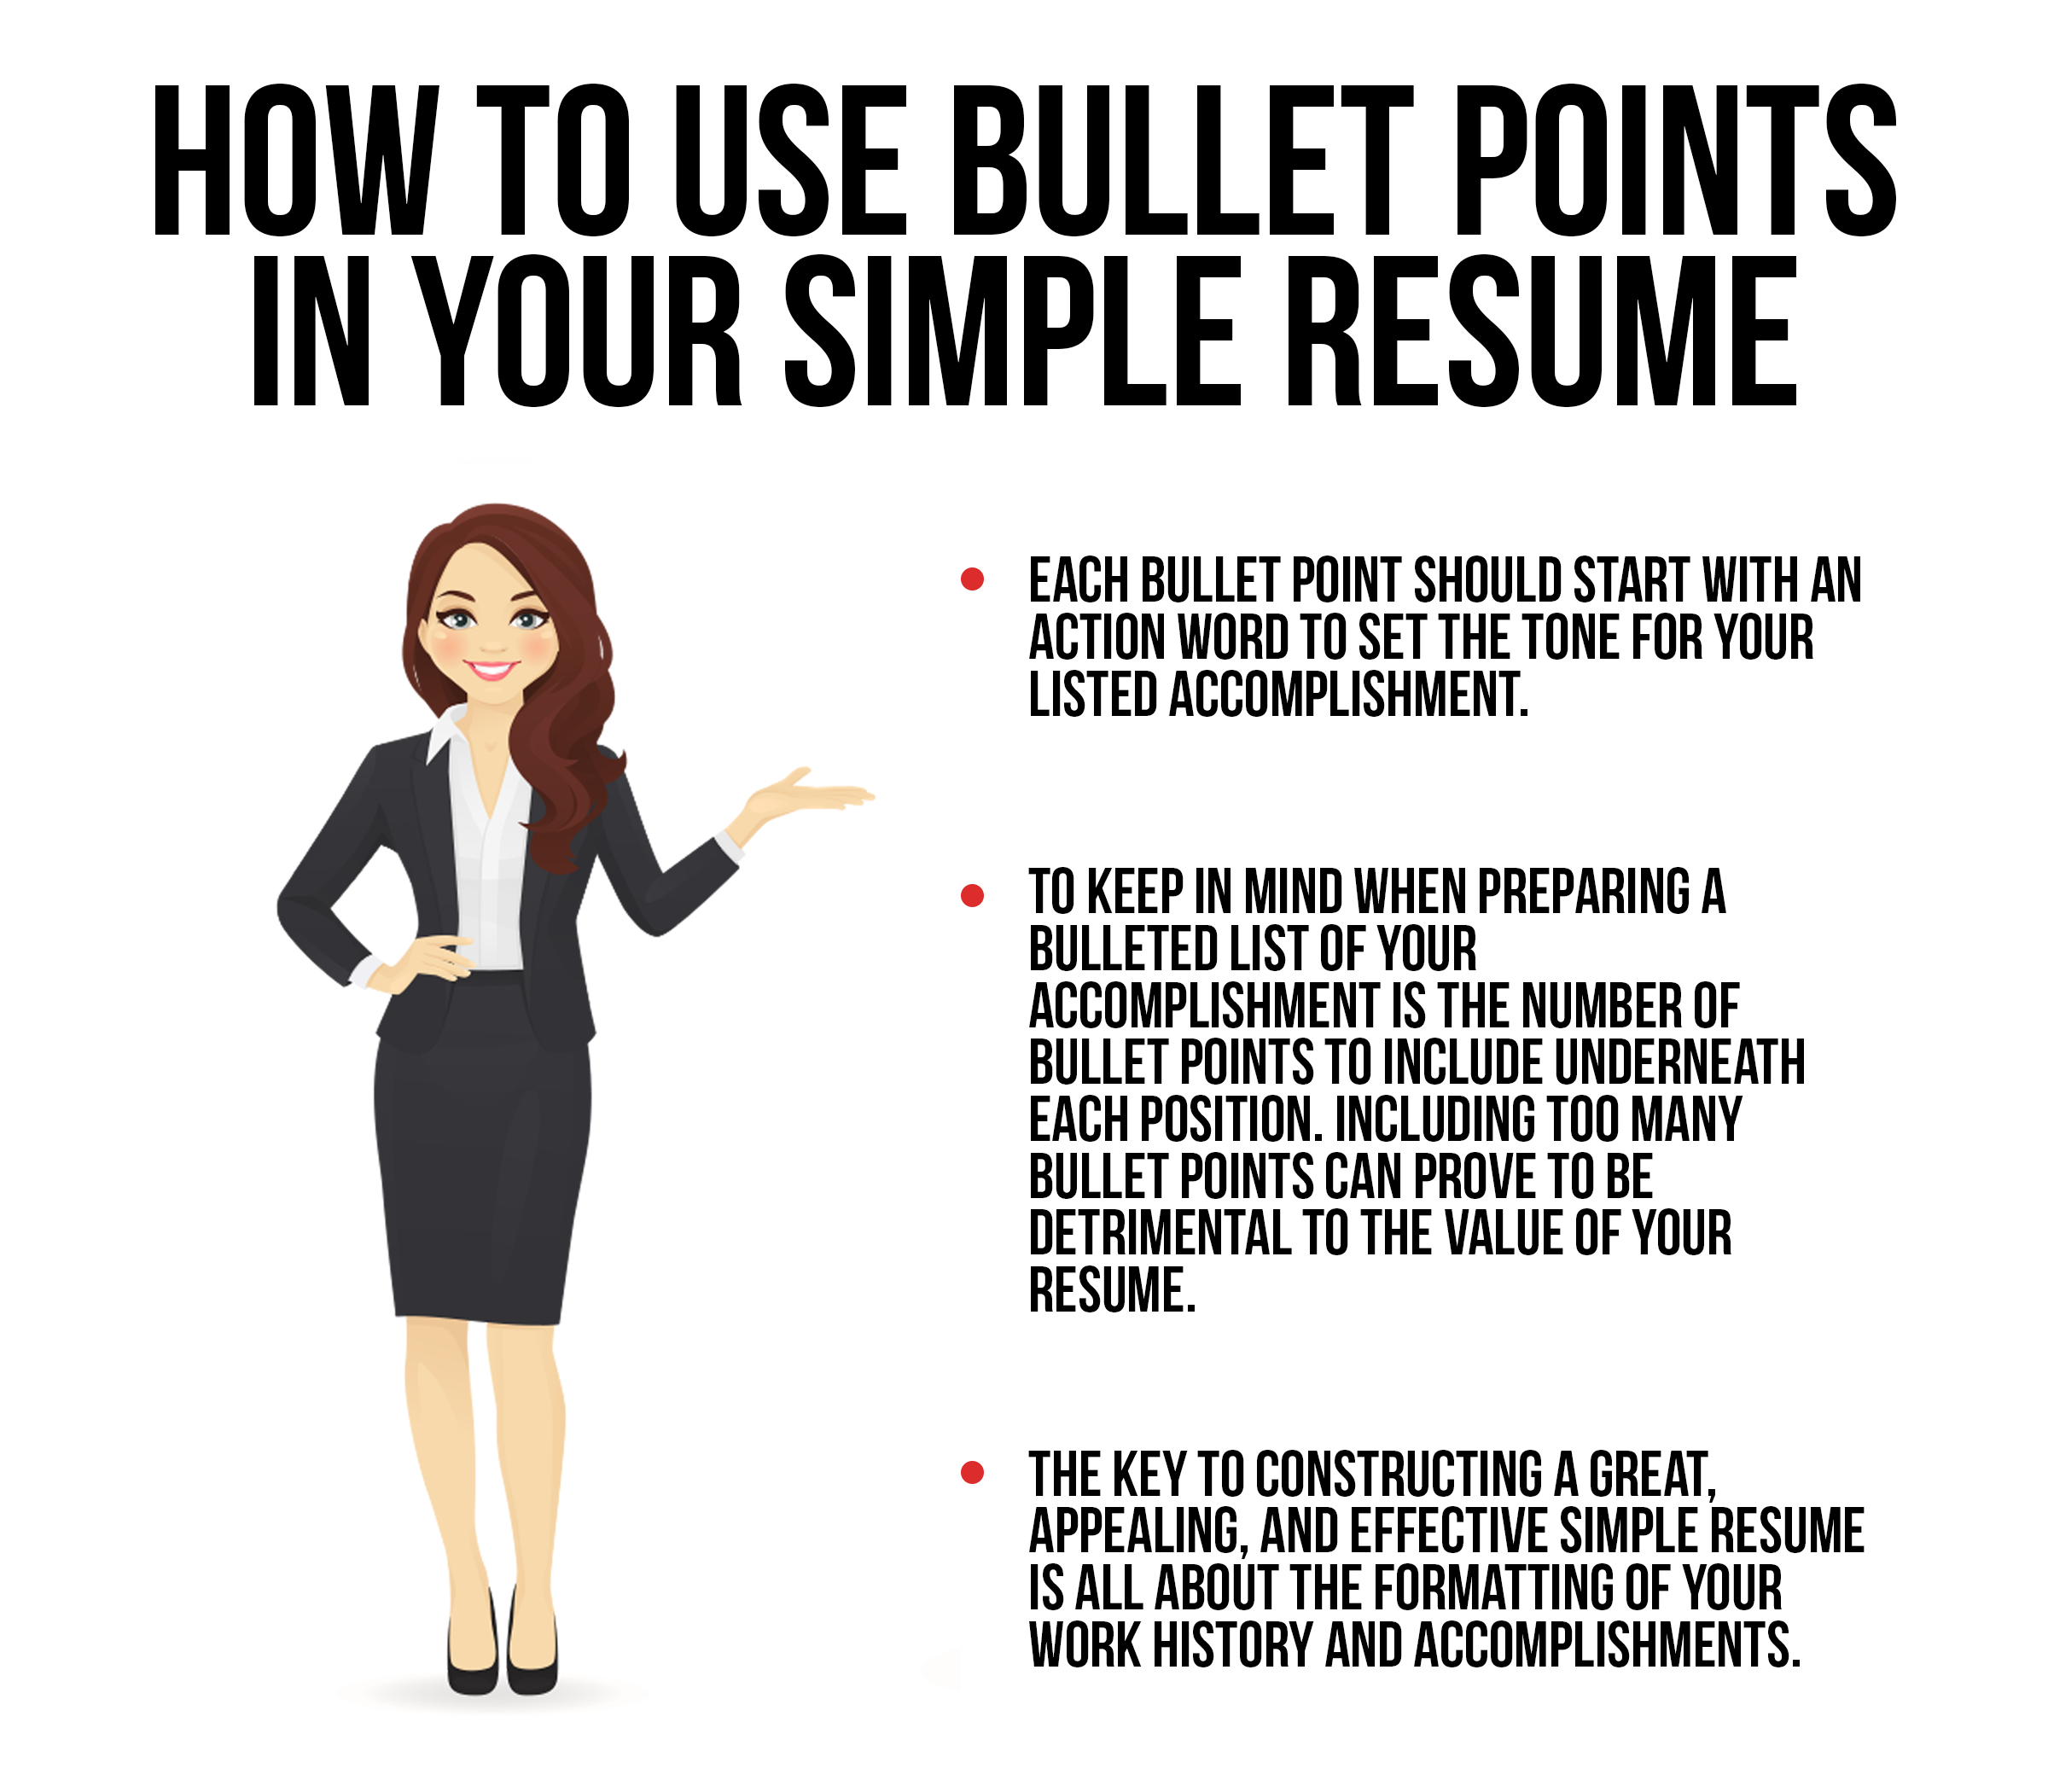 woman tells how bullet points should be formatted and used in a simple resume format